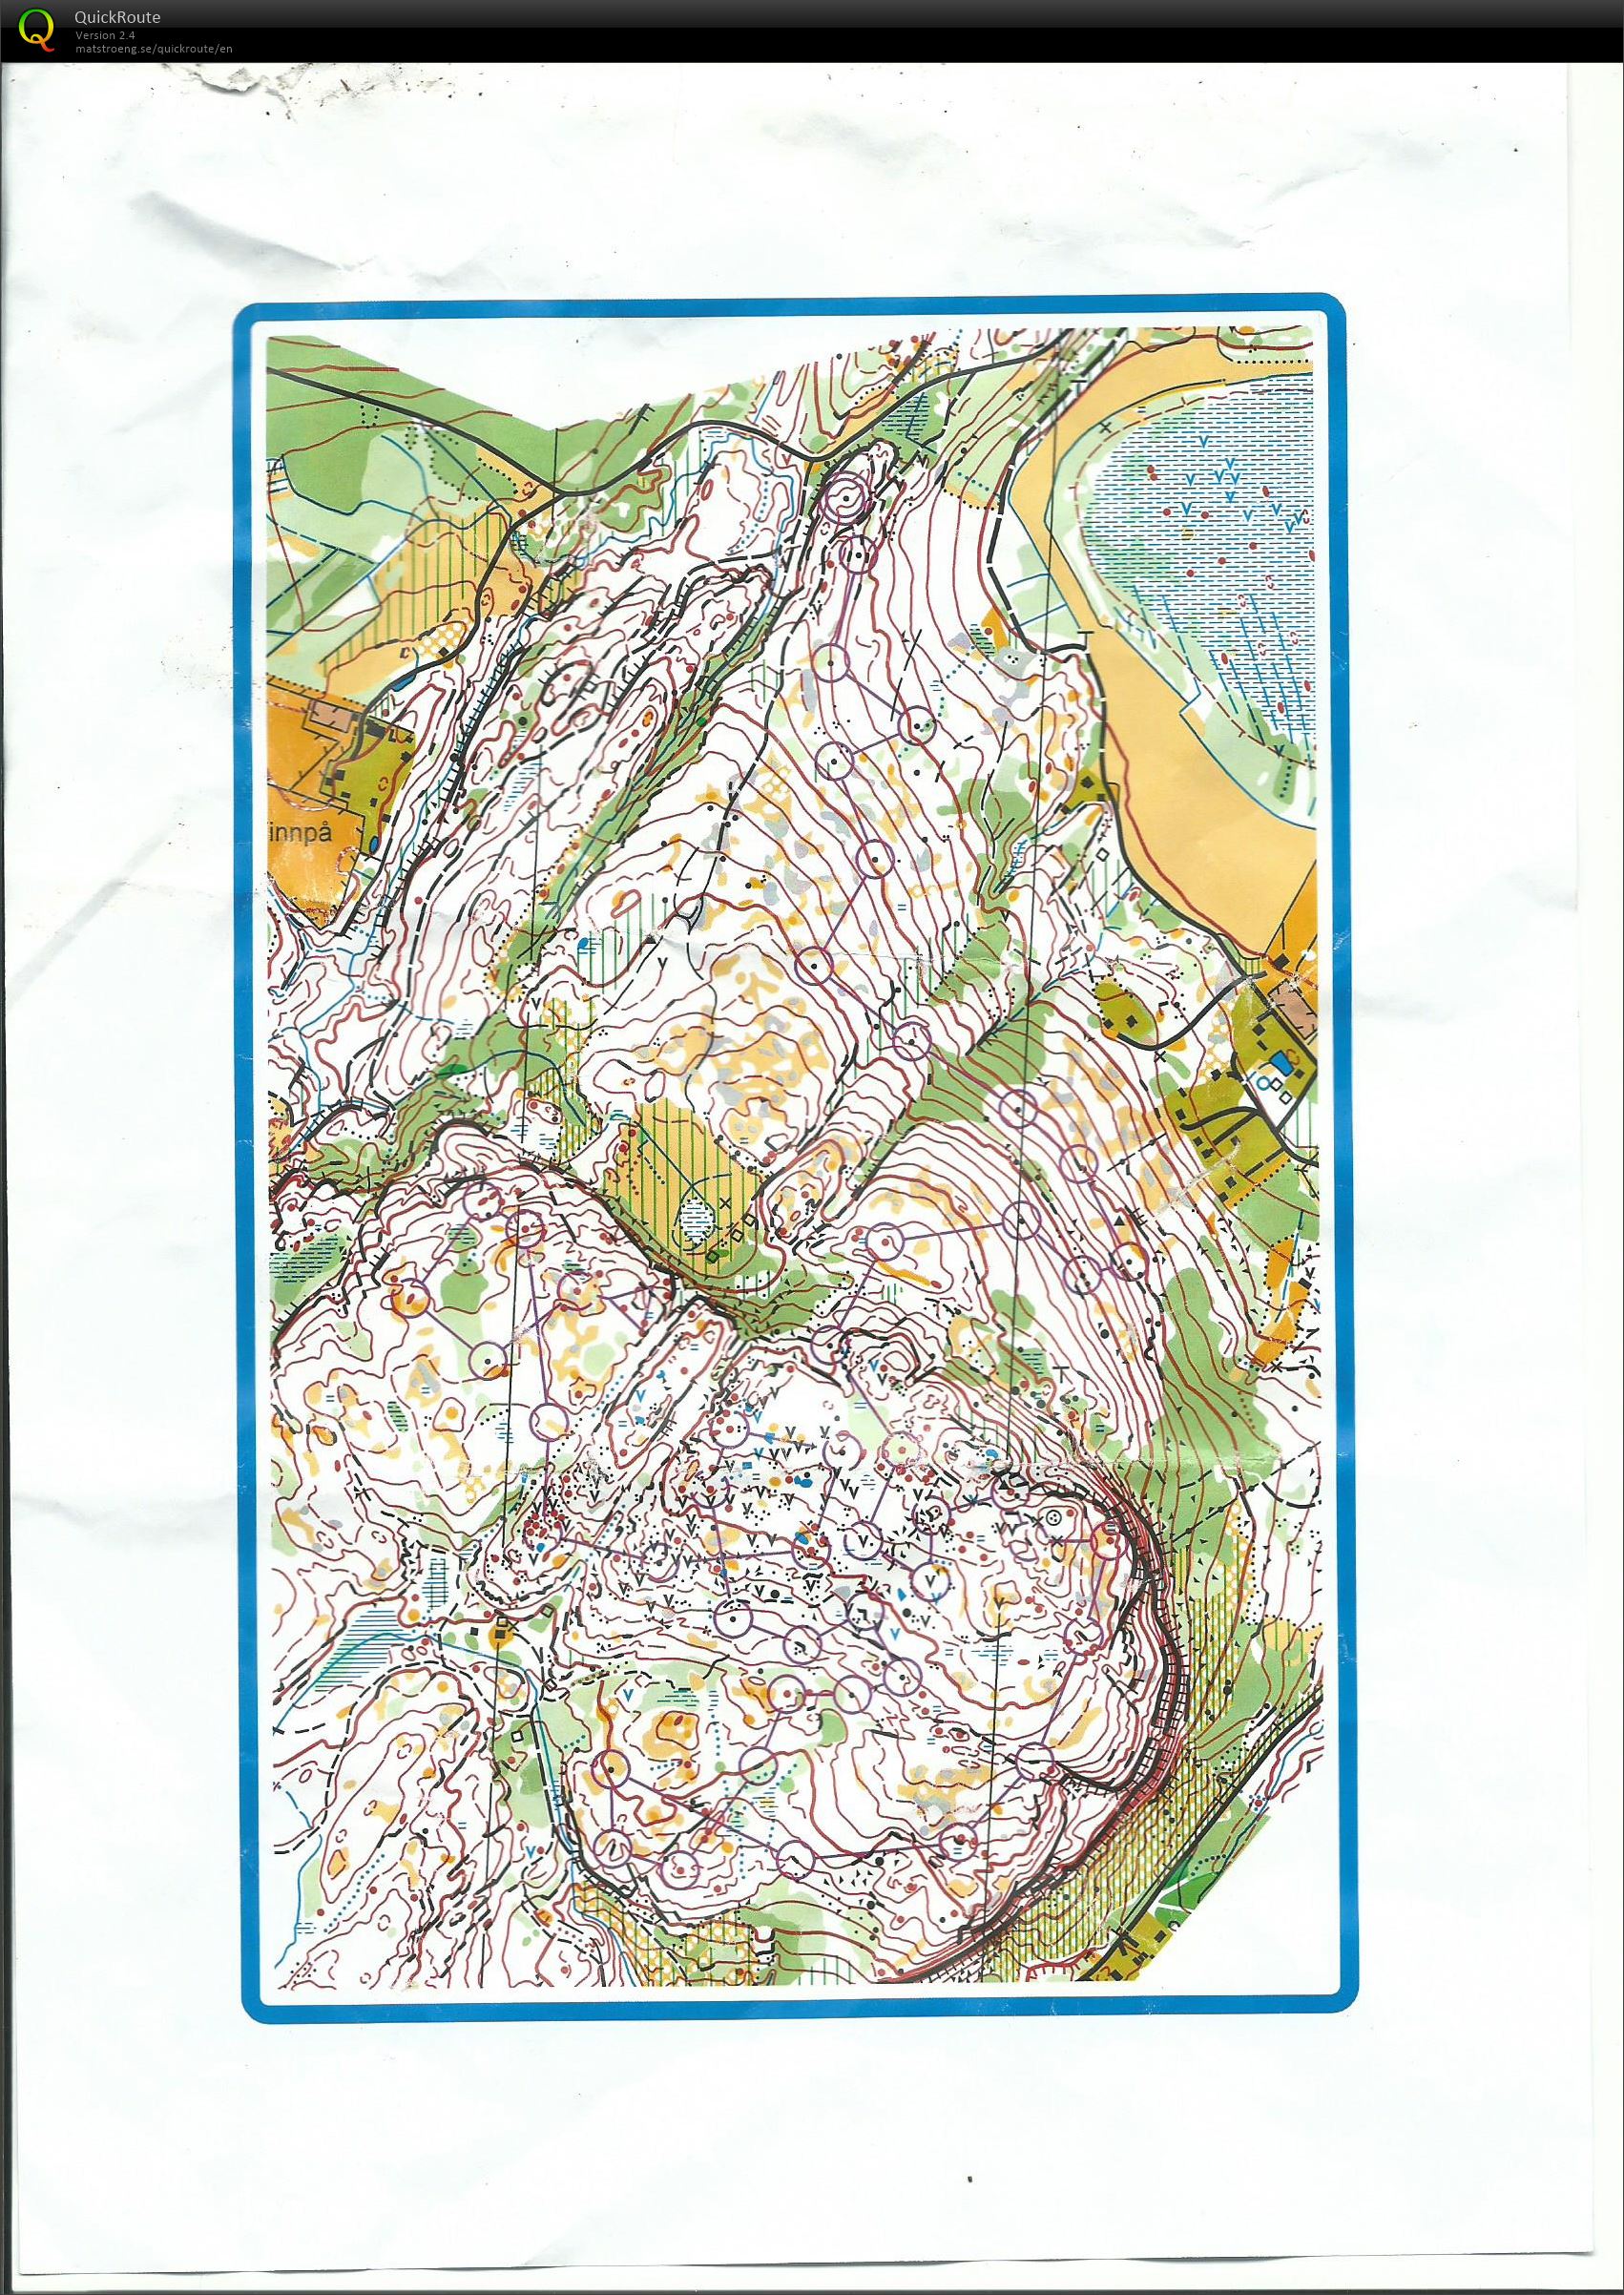 FSK control picking (WOC 2016 training for some...) (06.12.2015)